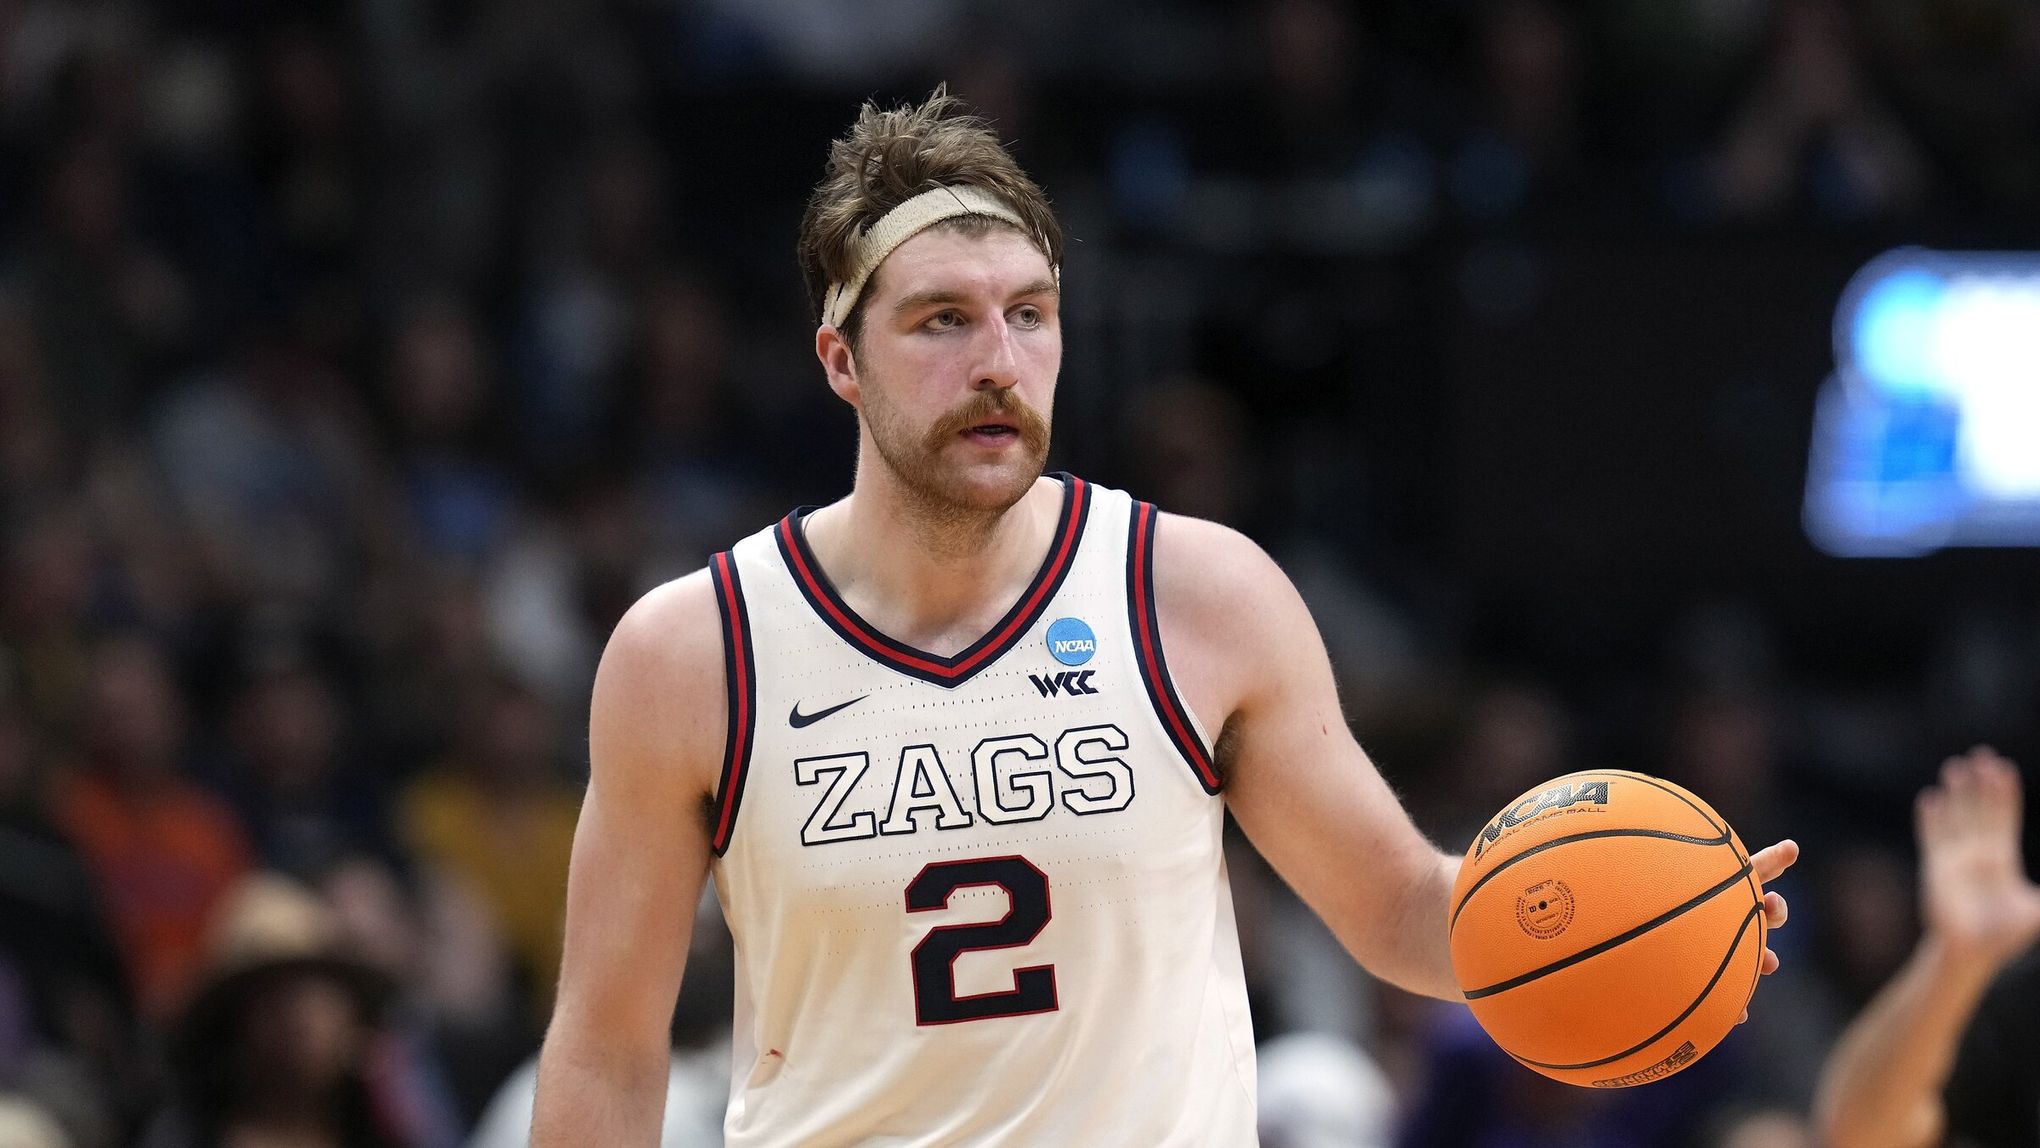 The best players in Gonzaga basketball history